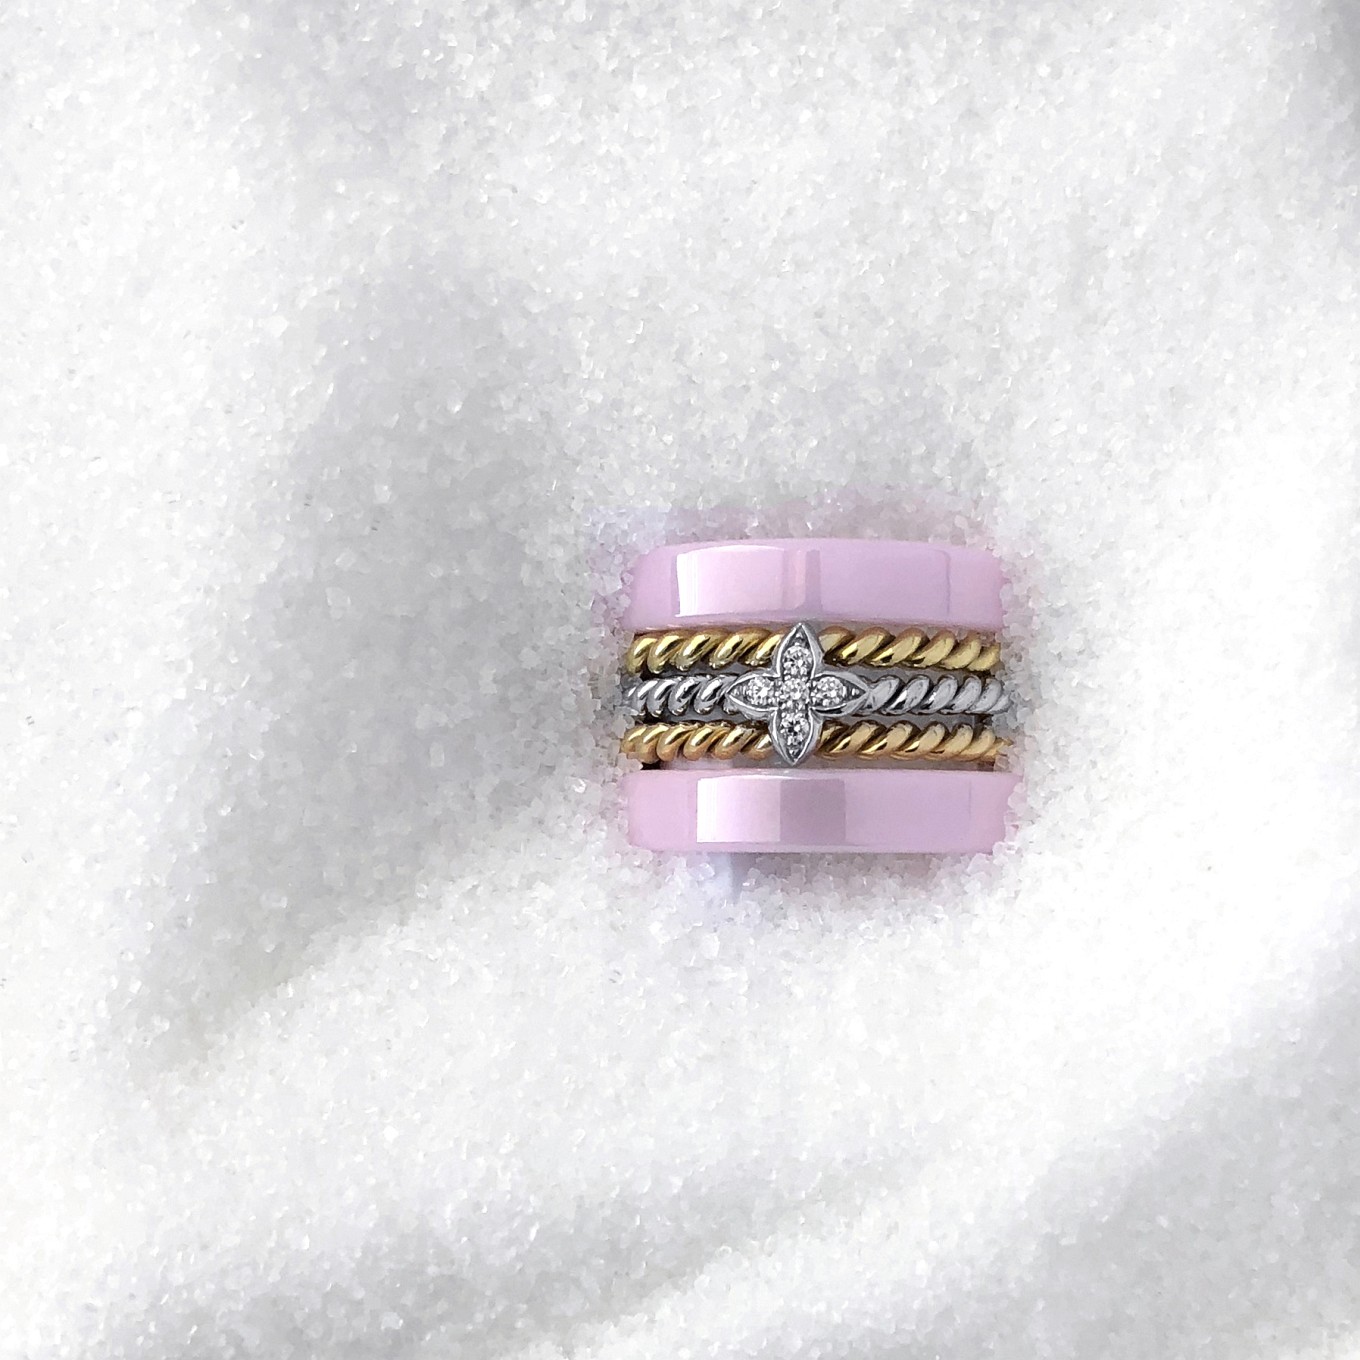 PINK CERAMIC BANDS<br/>PAIRED WITH BRAIDED BANDS & DIAMOND SEVILLA BAND